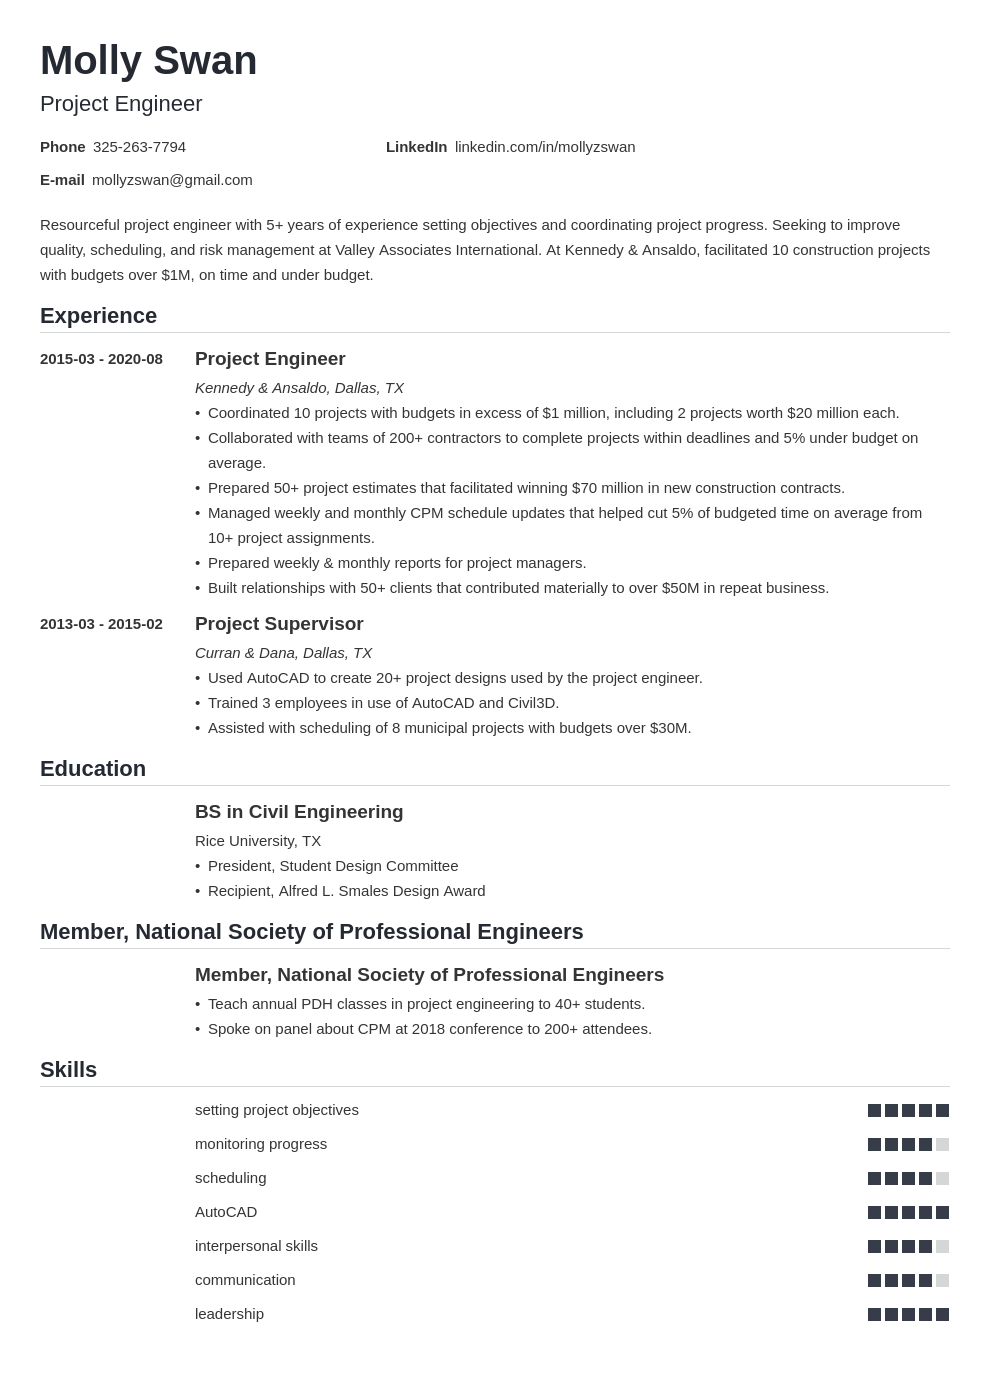 project-engineer-resume-examples-guide-10-tips